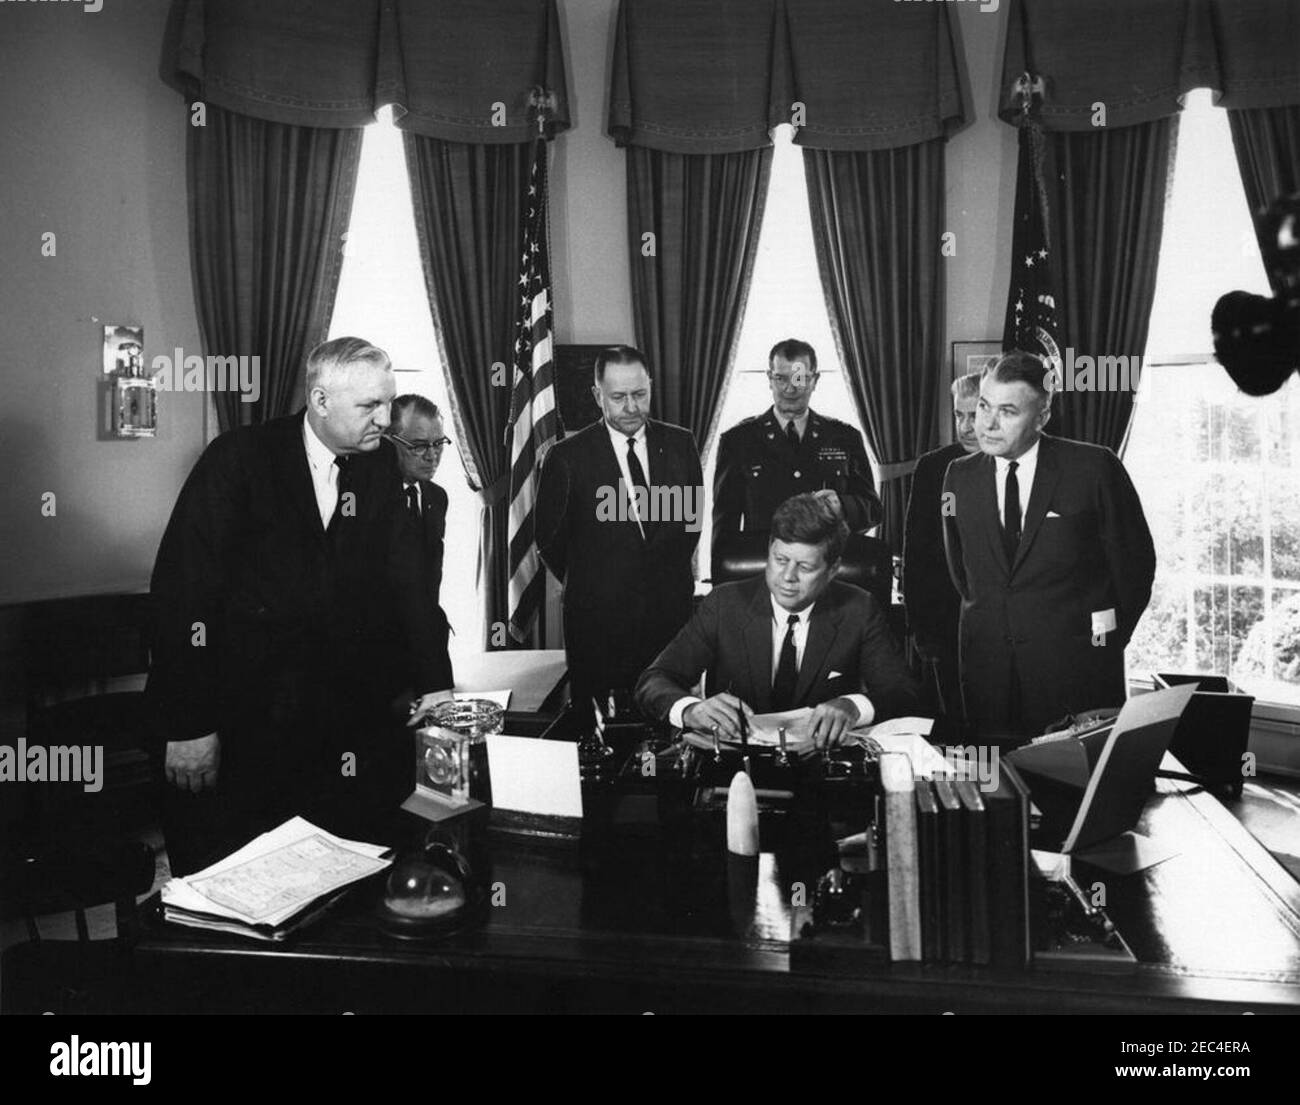 President Kennedy signs emergency flood relief measures for Kentucky counties, 11:30AM. President John F. Kennedy (seated at desk) signs emergency flood relief measures for Kentucky counties in the Oval Office of the White House, Washington, D.C. Standing (L-R): Congressman Carl D. Perkins (Kentucky); Mayor Paul Judd of Frankfort, Kentucky; Congressman John C. Watts (Kentucky); Adjutant General of Kentucky, A. Y. Lloyd; Administrative Assistant to Congressman Watts, Paul Kelly; Governor of Kentucky, Bert T. Combs. Stock Photo